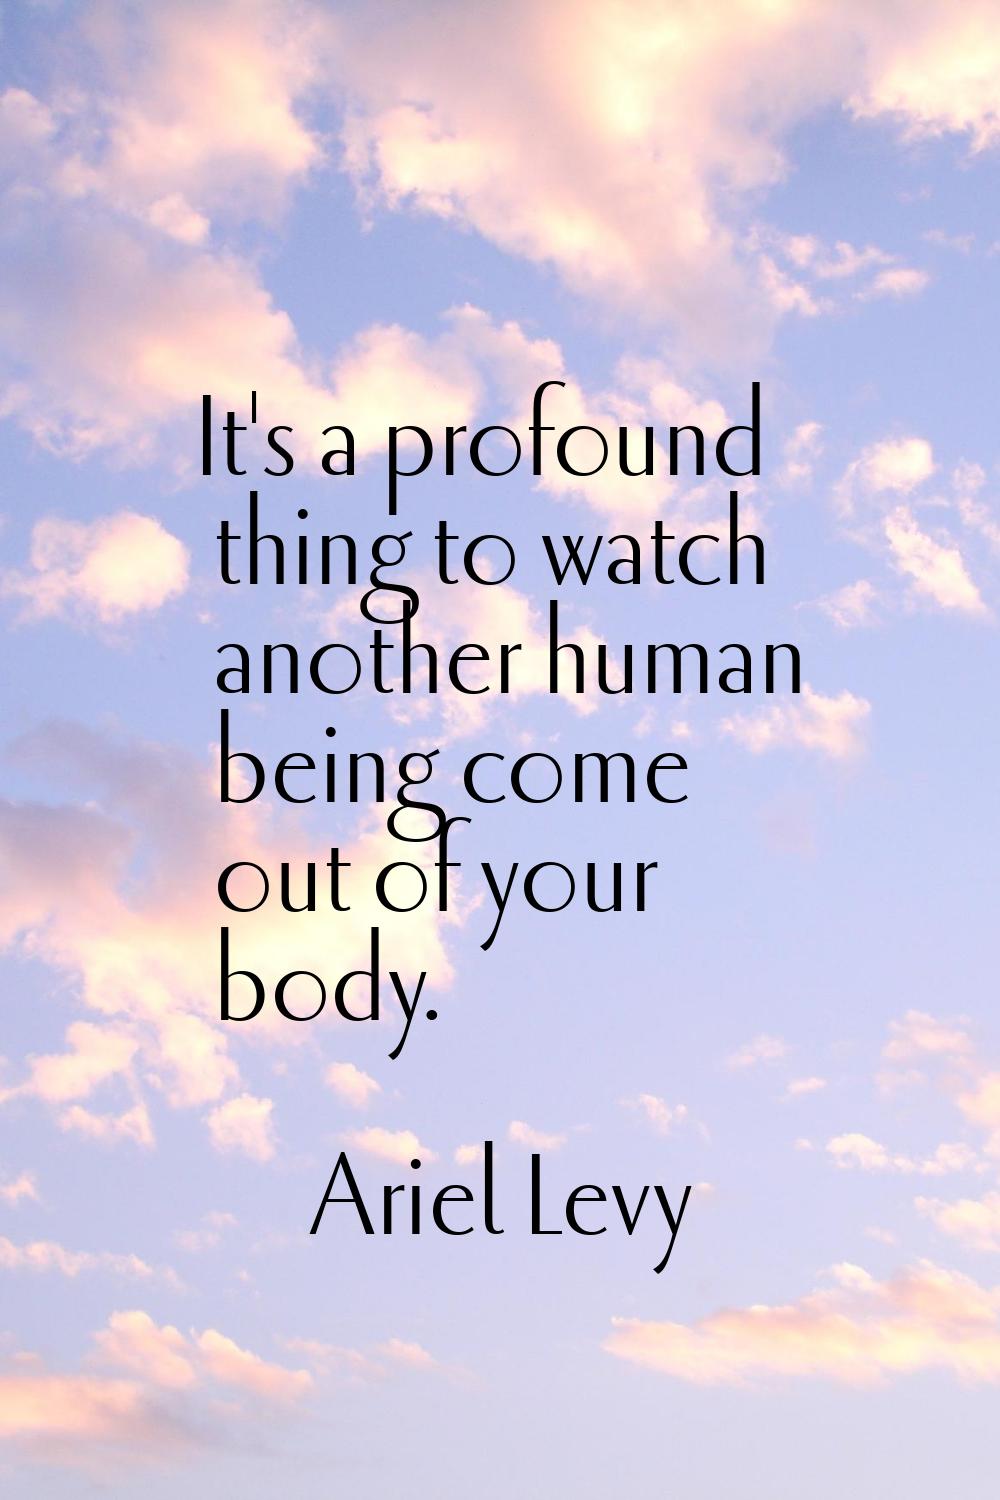 It's a profound thing to watch another human being come out of your body.